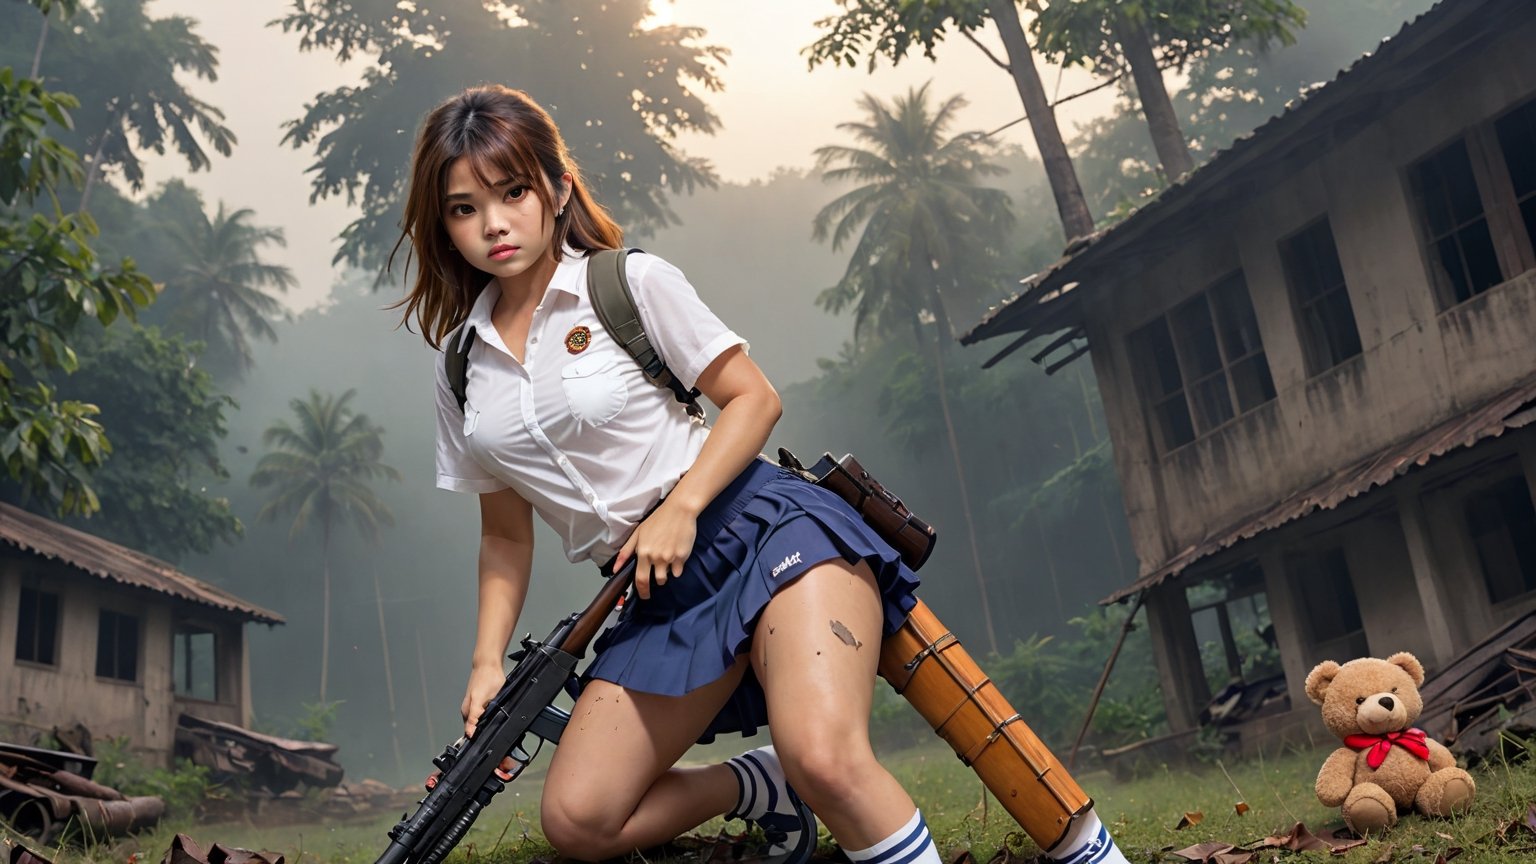 weapon, gun, st ak-47, ((A lonely girl)) (7yo:1.2), (Thai nationality, bob-hair, white-skin, nude, tight-vagina, small pussy, curvy, big-breasts, tits, boobs , Plump thighs, angry).

((wearing white-shirt, darkblue-skirt, school-shoes, panties)),((naked legs)),

((she looking very dirty and dirt-stain, nasty)),
((clothes is torn and holes)),
((sexy pose, open legs)),((stain on clothes)), 

,((strong wind blowing her hair and clothes)),((abandoned school in thailand background ,In the deep forest, sunset, fog, dark tone)),((The wind blows the leaves around her)),

(((a teddy bear walking beside and close to her)):1.2),
((( rifle, ak-47,  holding gun)):1.2),

,((1girl)),((1_girl)),((sole)),((face-focus)),((detailed eyes and face)), ((full wide-environment)), ((close-up, wide-angle shot, low-angle shot)),((best quality ,ultra_detailed ,highres))